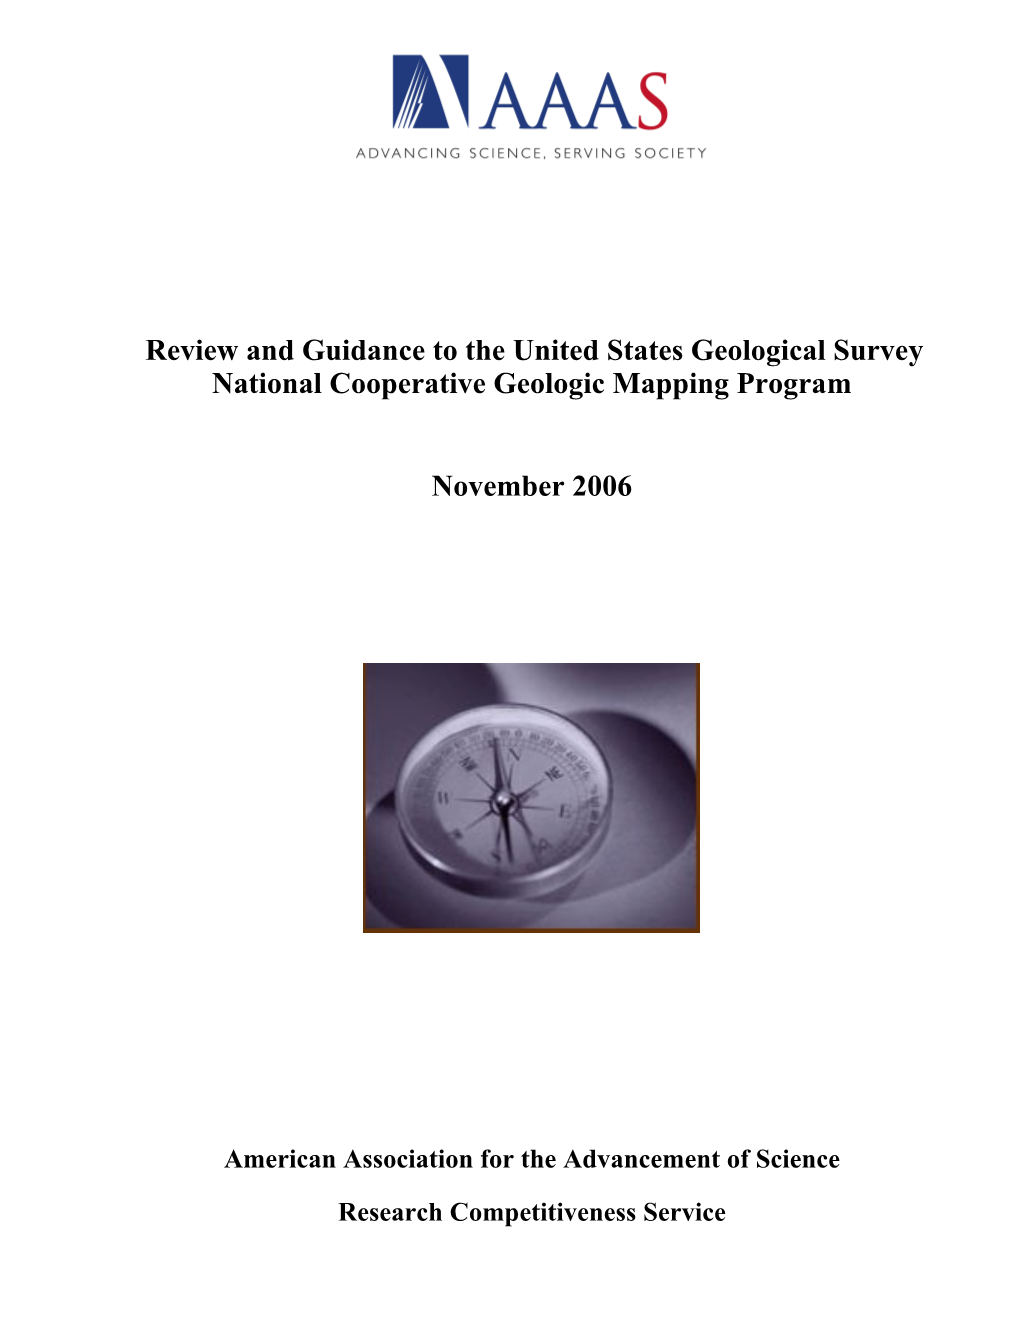 Review and Guidance to the United States Geological Survey National Cooperative Geologic Mapping Program November 2006